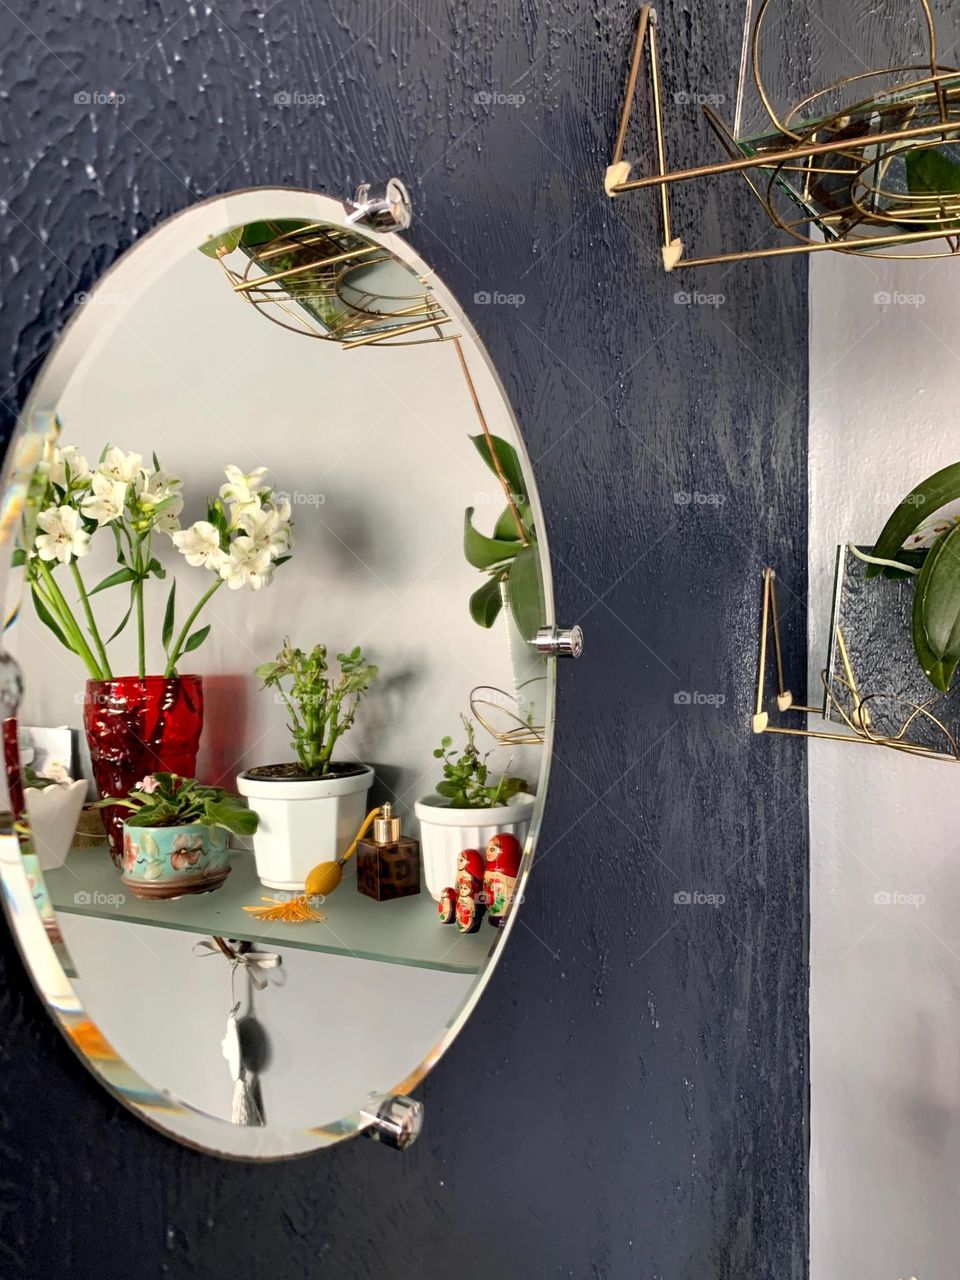 Reflection of plants in the mirror